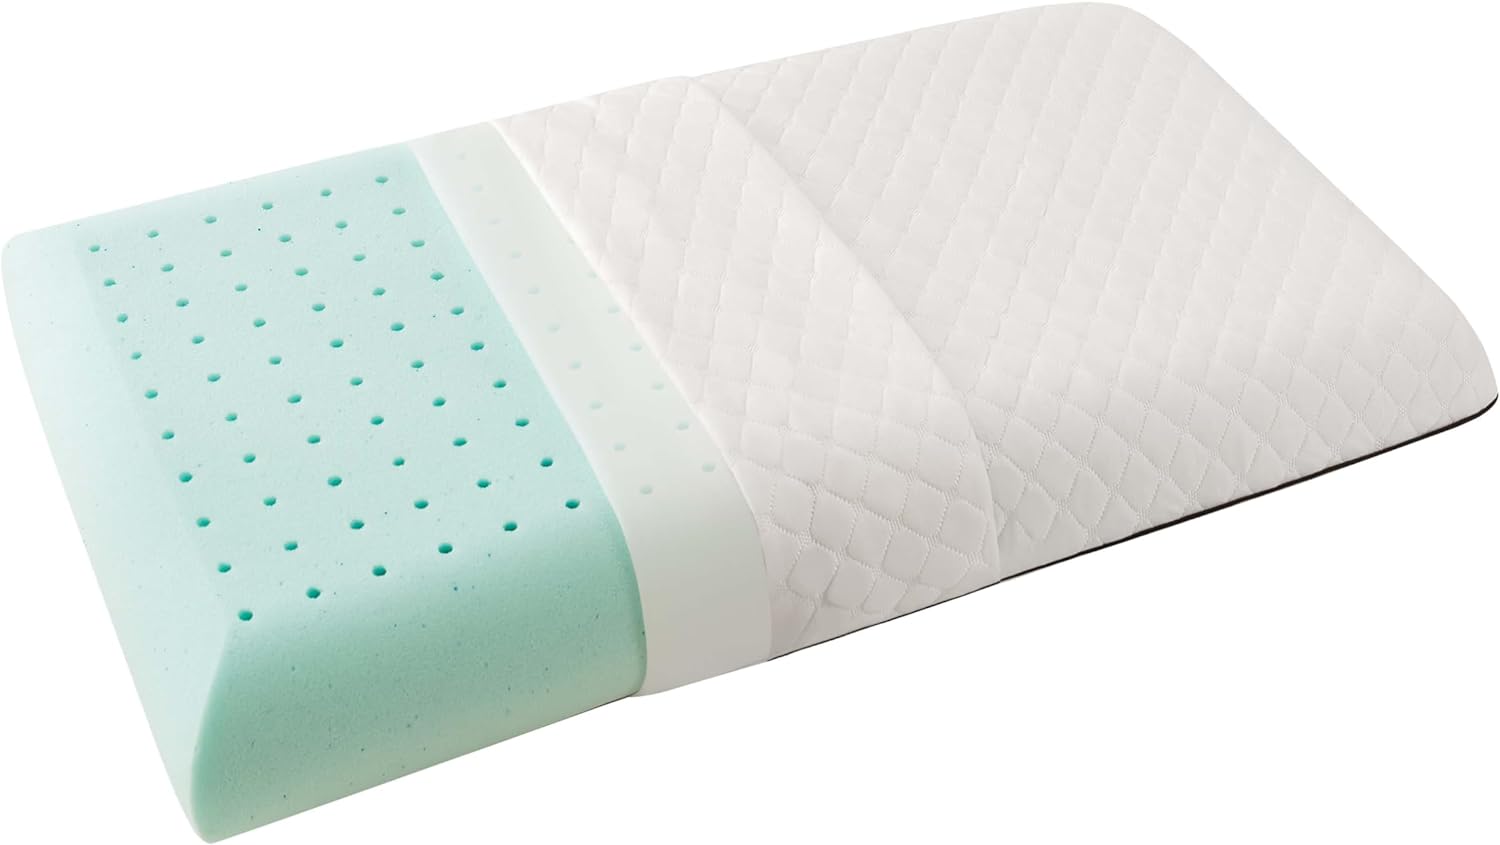 I initially bought several pillows off of Amazon. Basically I was trying to find one that worked well for me. I bought this as a stomach sleeper but I find it's more comfortable when I sleep on my back with it.I actually ordered a second one because I liked it so much. Highly recommend.